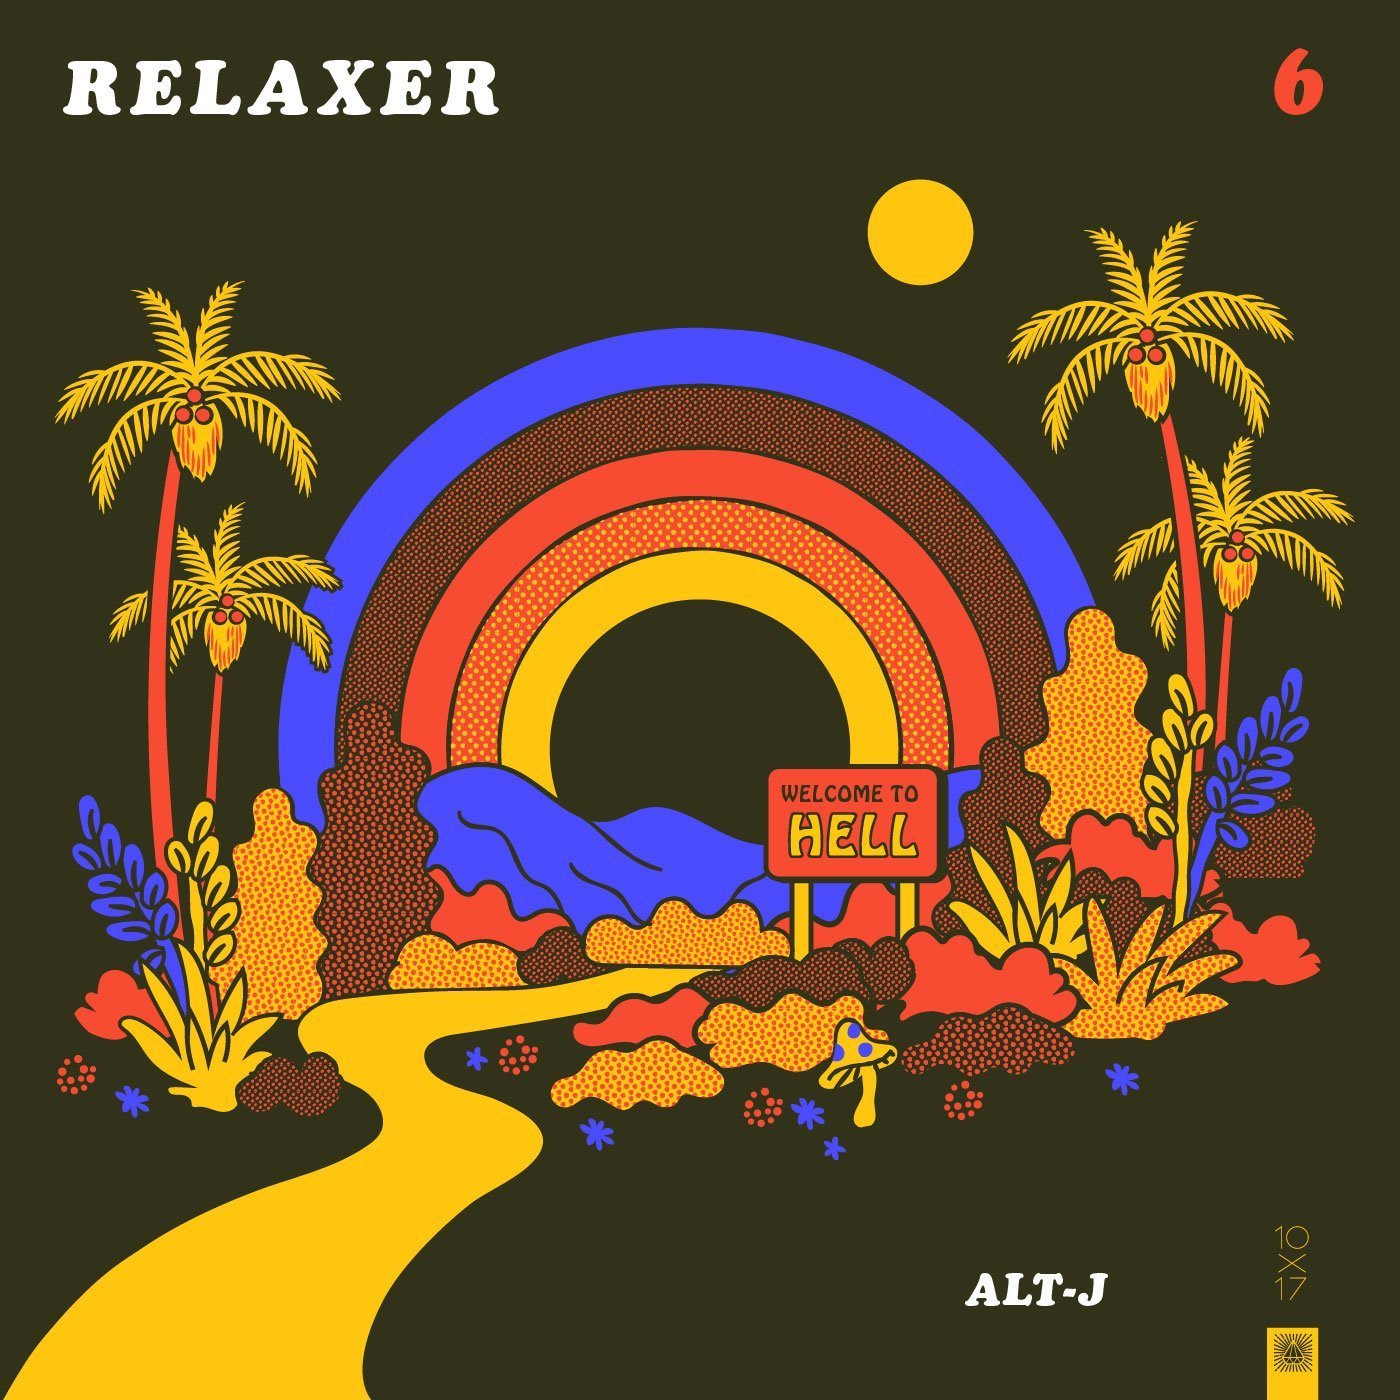 Alt-J Album Cover Reimagined by Amy Hood - Island scene with palm trees and rainbow